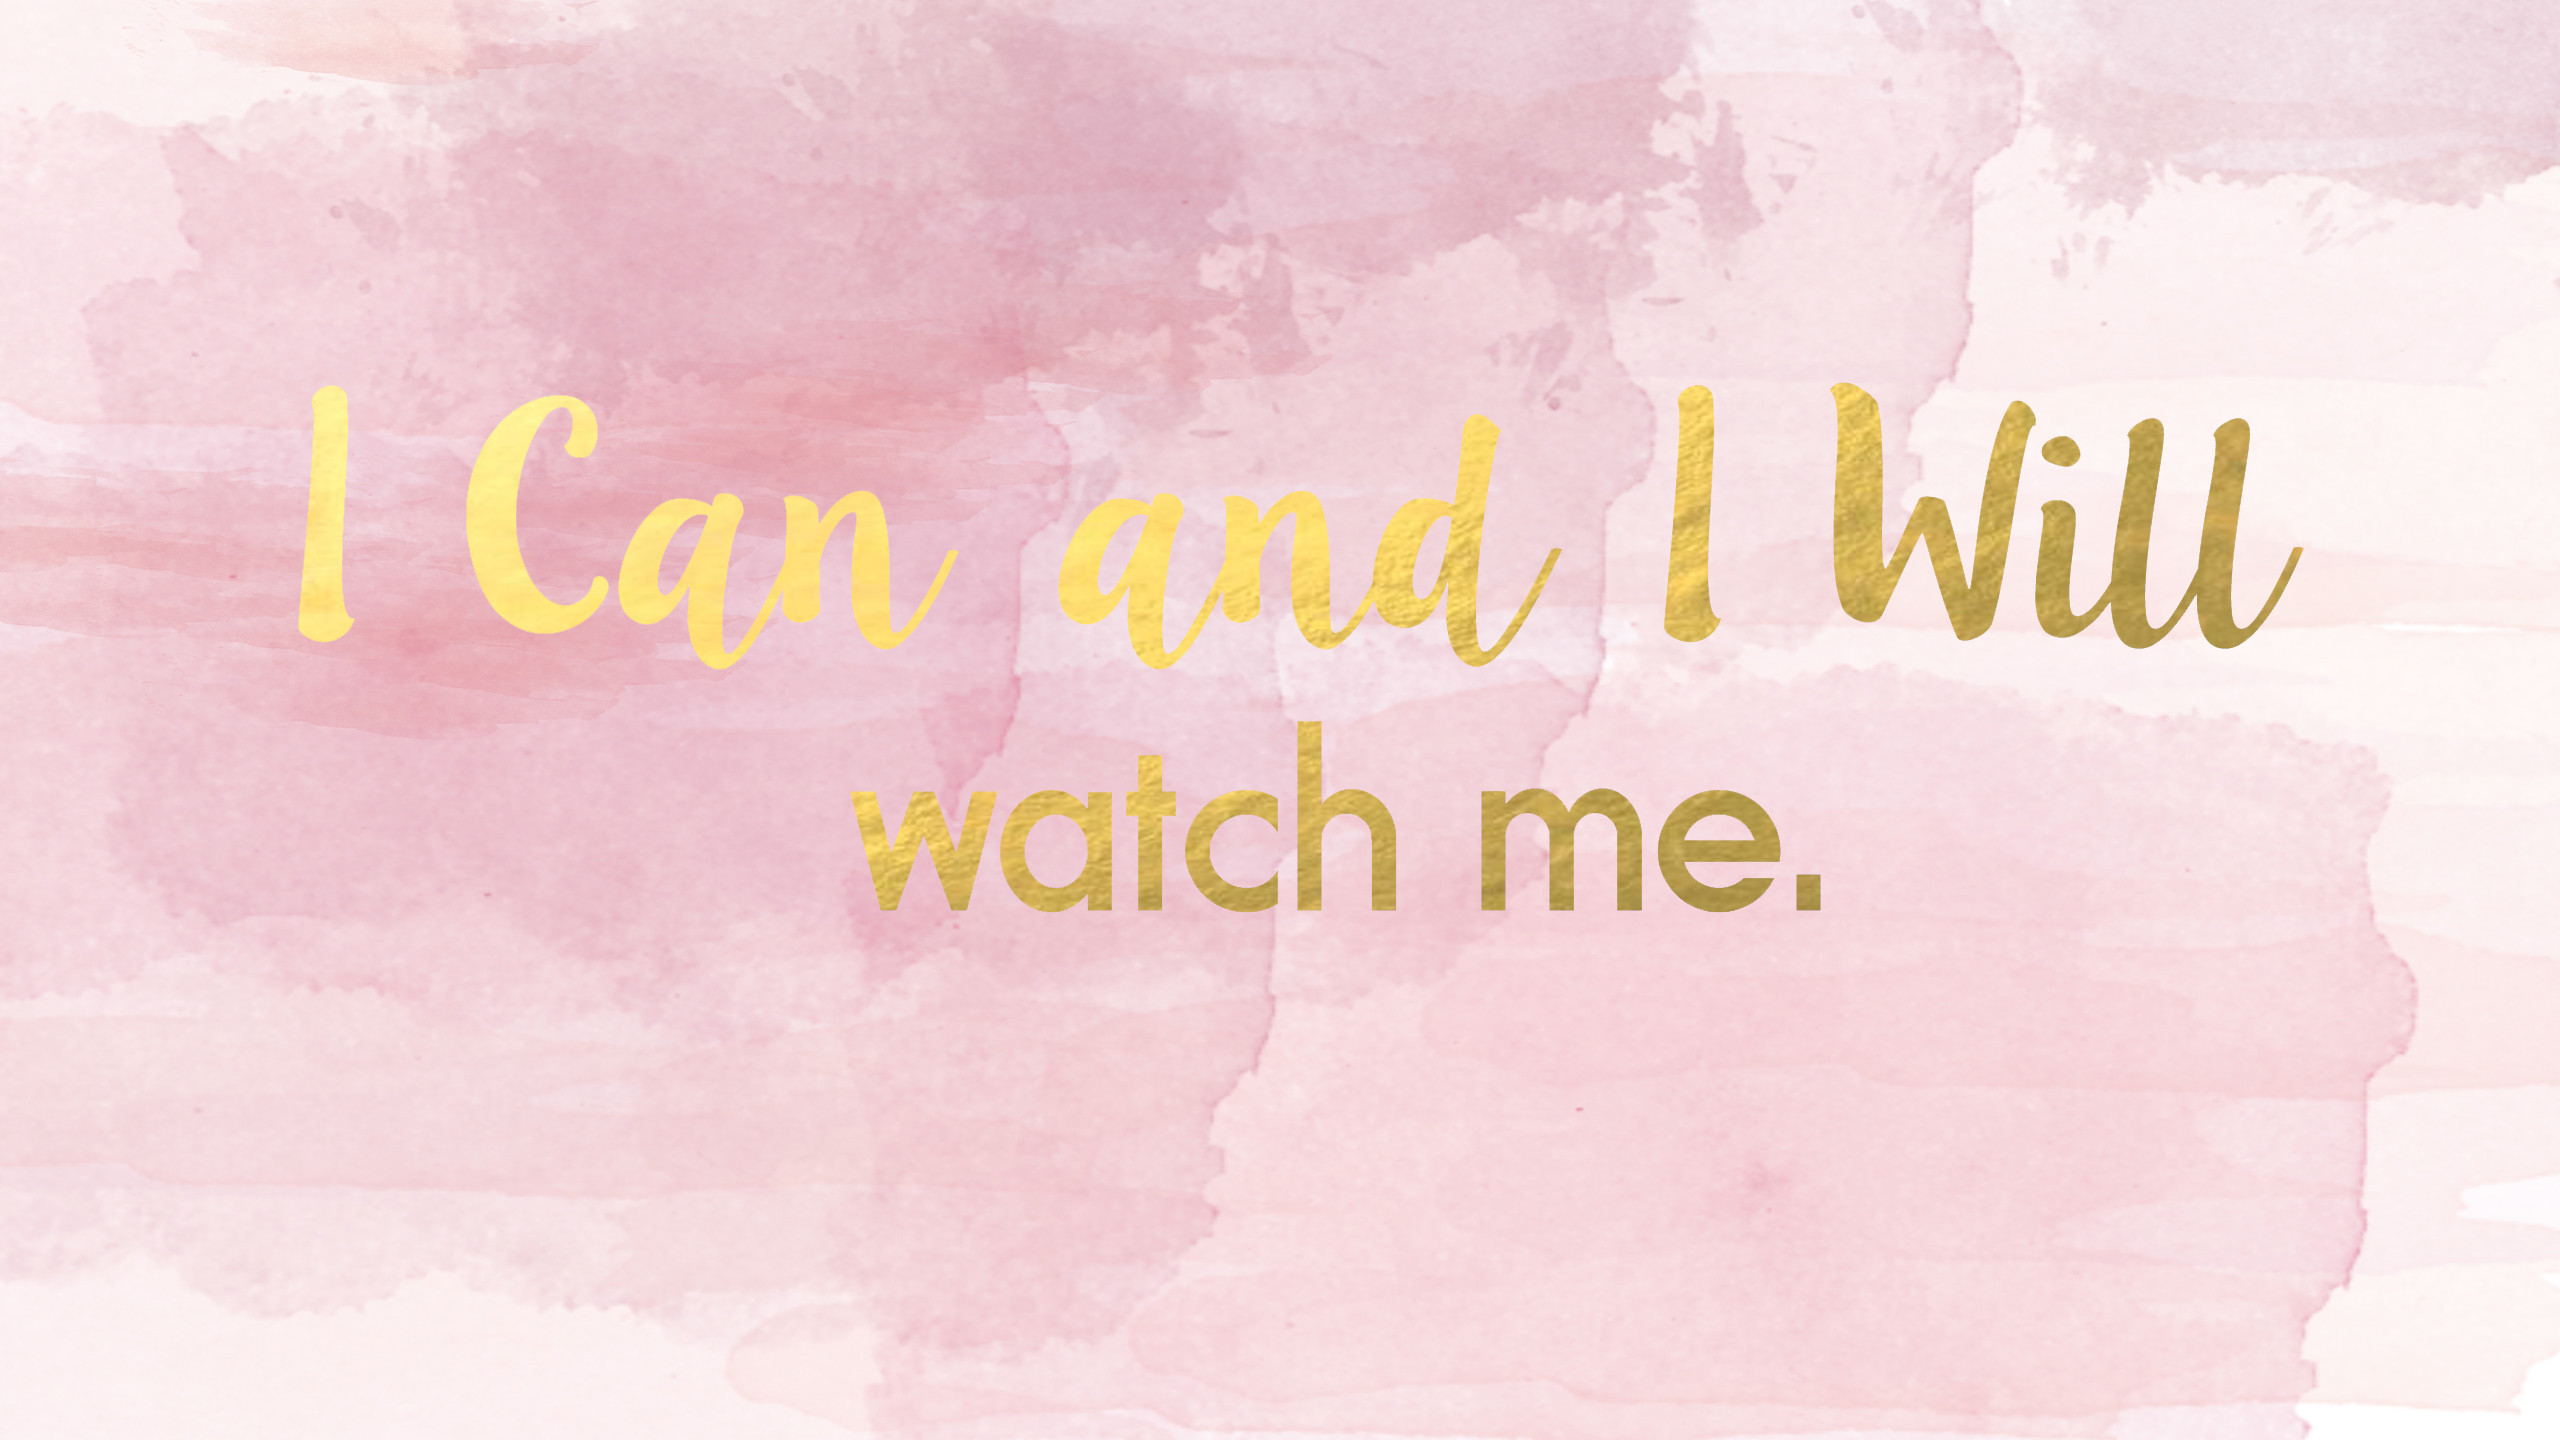 "I Can And I Will" desktop wallpaper pink pastel and gold.